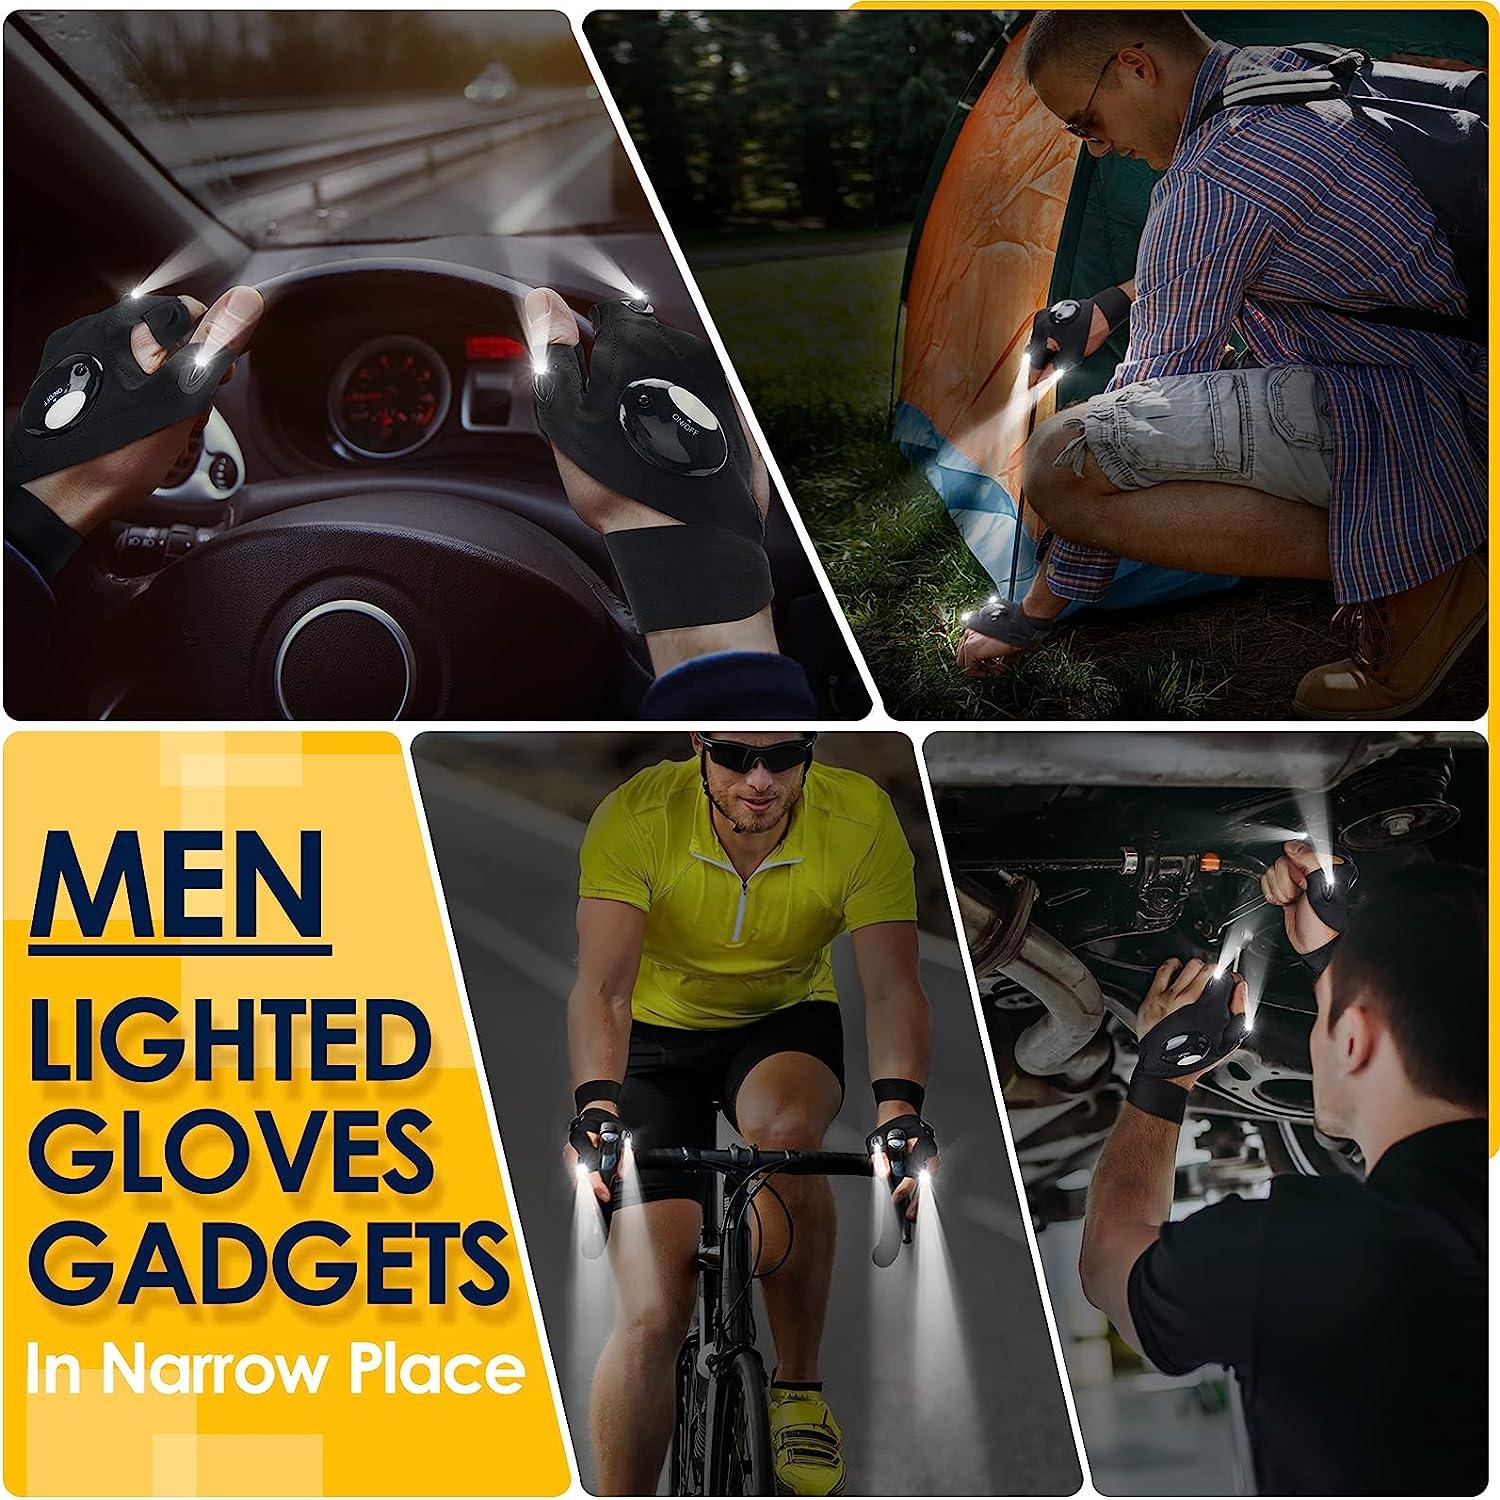 LED Flashlight Gloves Gifts for Men - Dad Gifts for Fathers Day